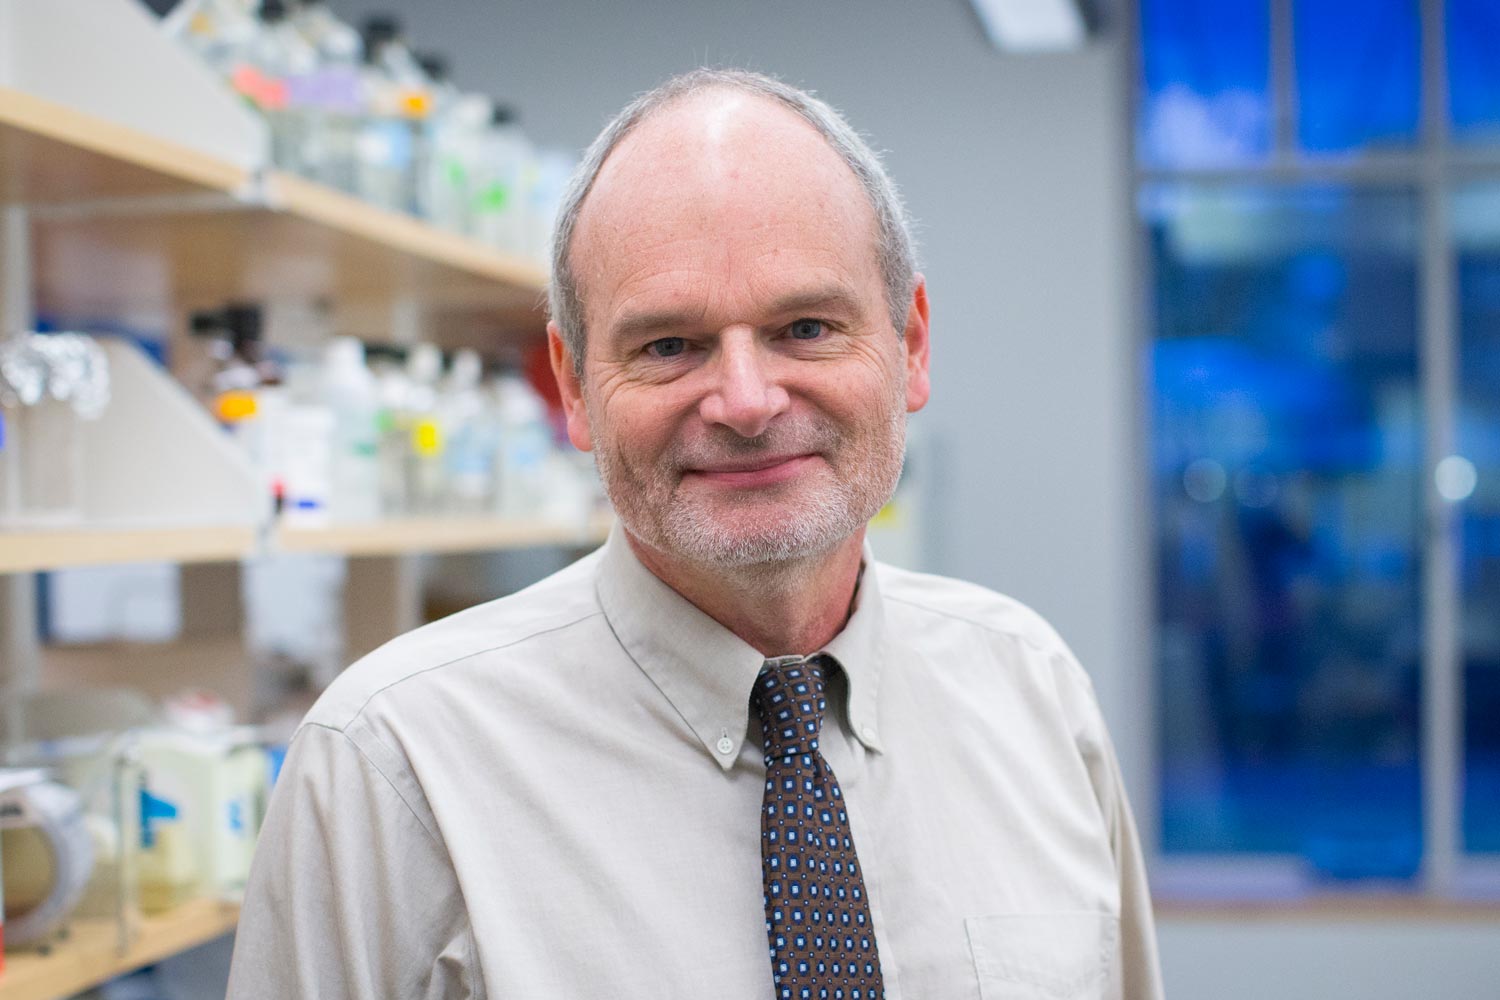 Dr. Bill Petri is chief of UVA’s Division of Infectious Diseases. (Photo by Sanjay Suchak, University Communications)